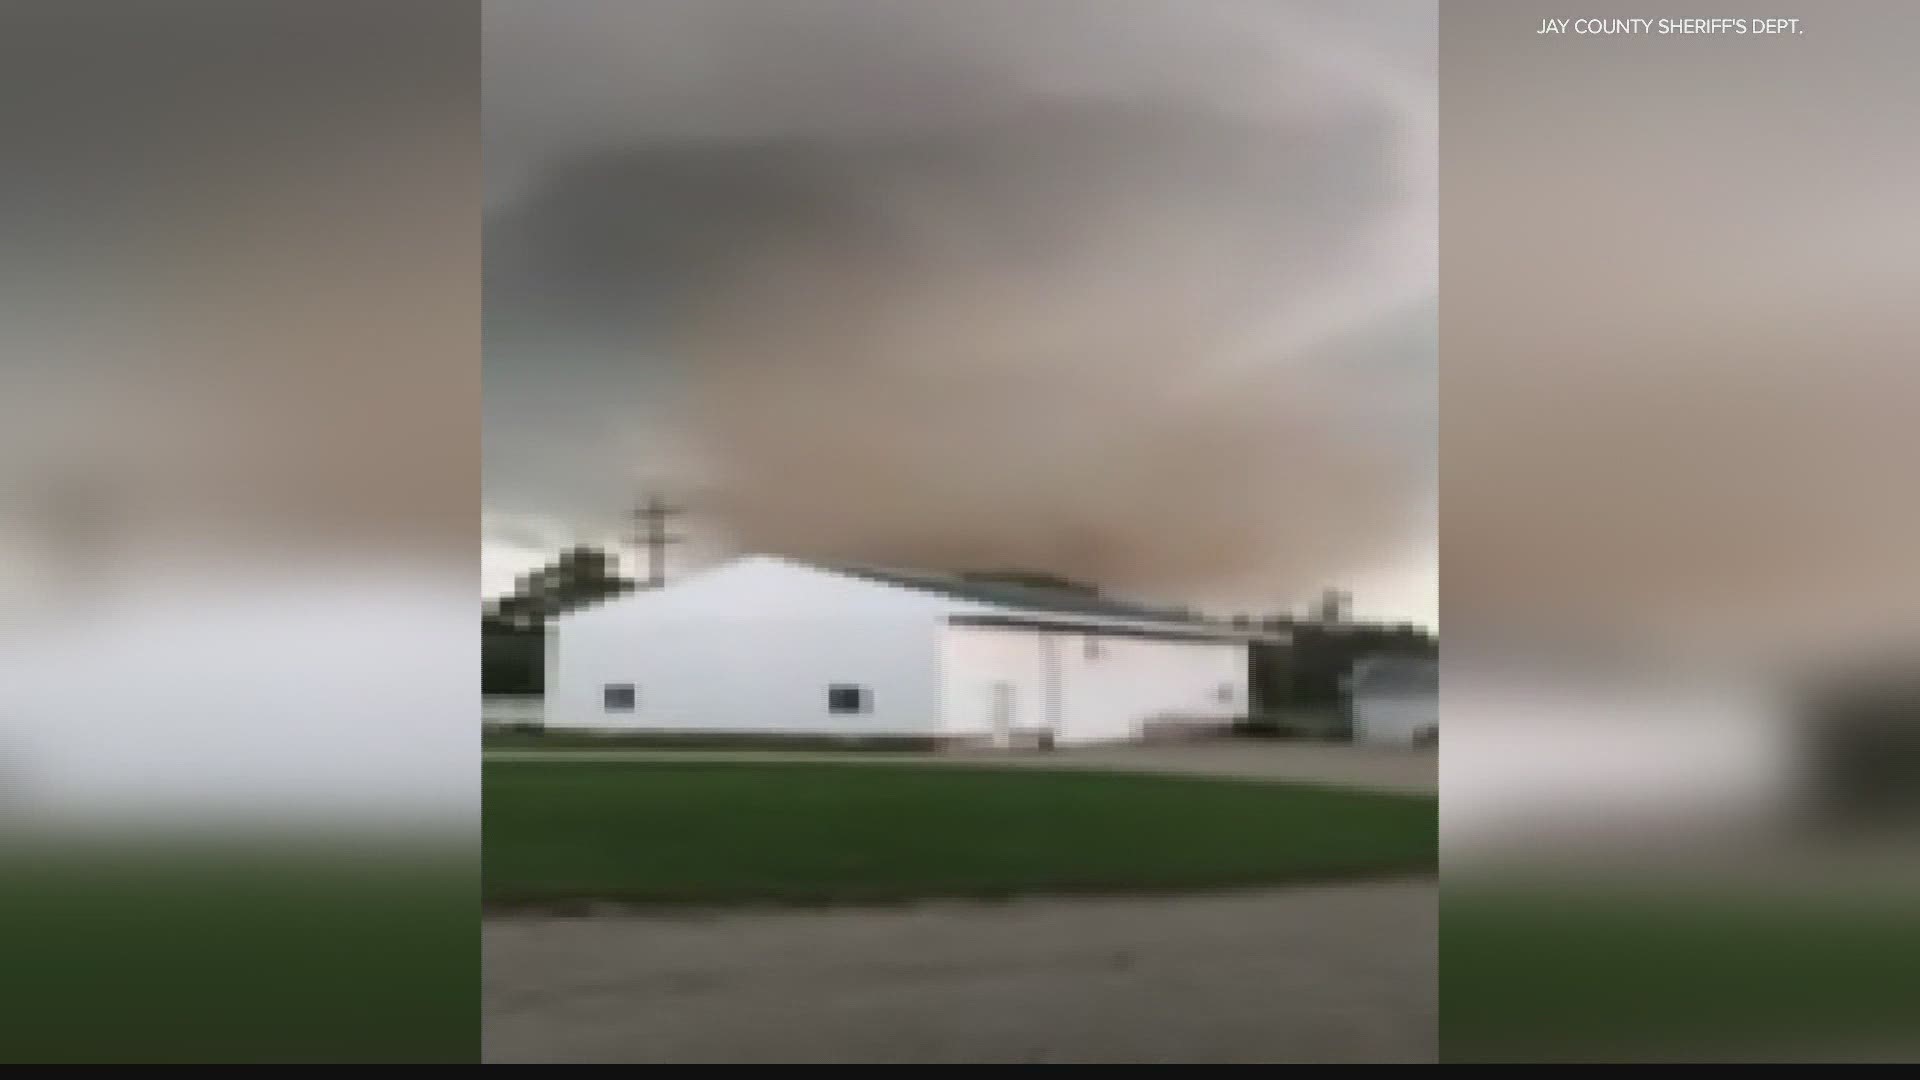 Jay County experienced a tornado Friday - and several viewers witnessed it in real time.